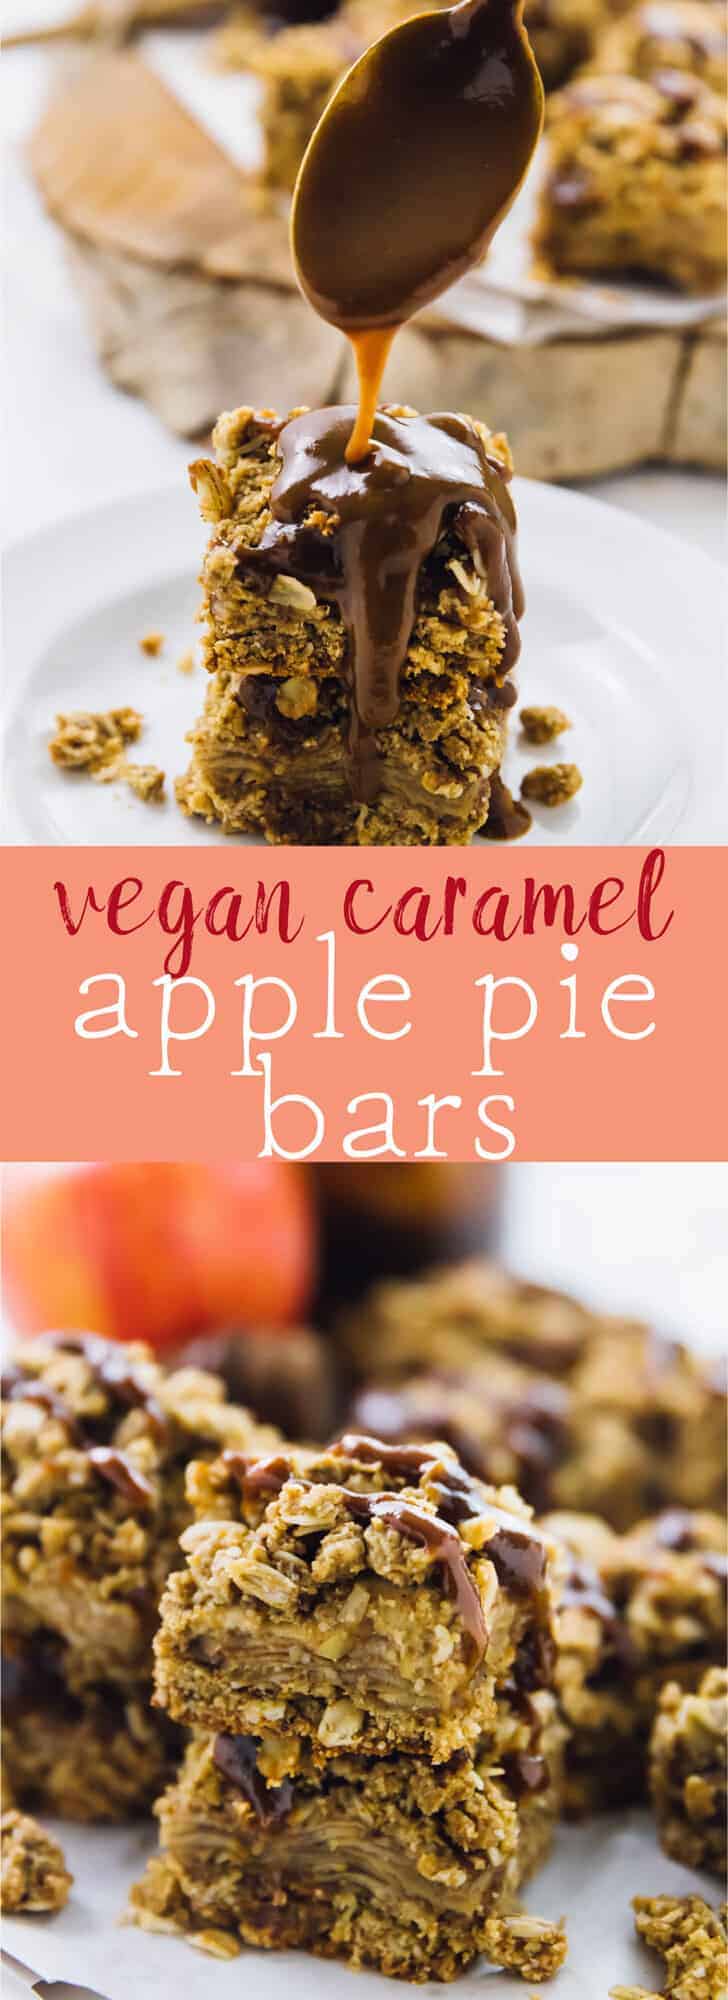 These Vegan Apple Pie Bars are absolutely decadent! They're drizzled with homemade salted caramel, topped with a divine crumb topping and are gluten free! via https://jessicainthekitchen.com